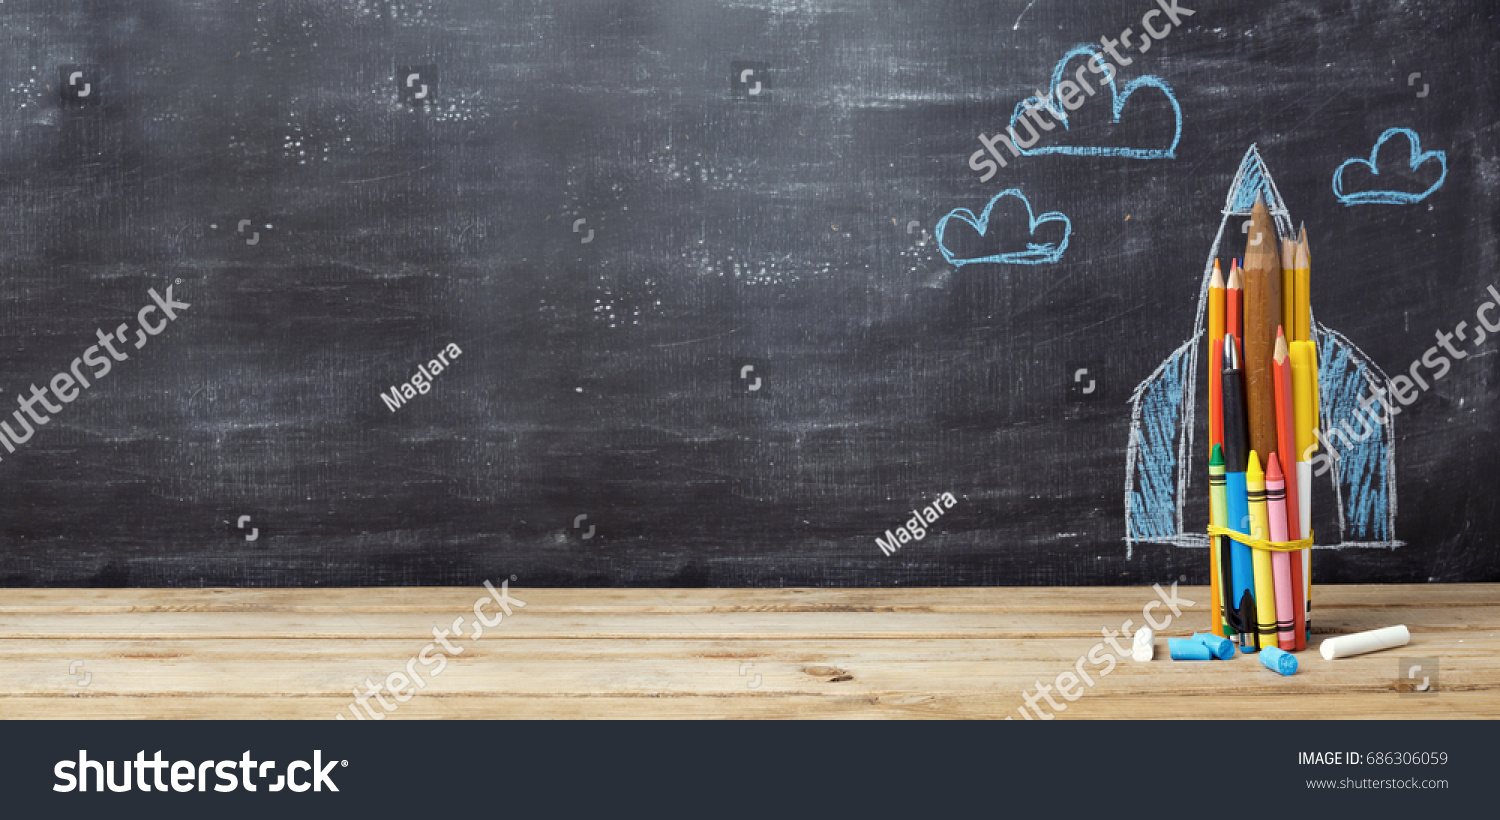 Back to school concept with rocket made from pencils over chalkboard background #686306059